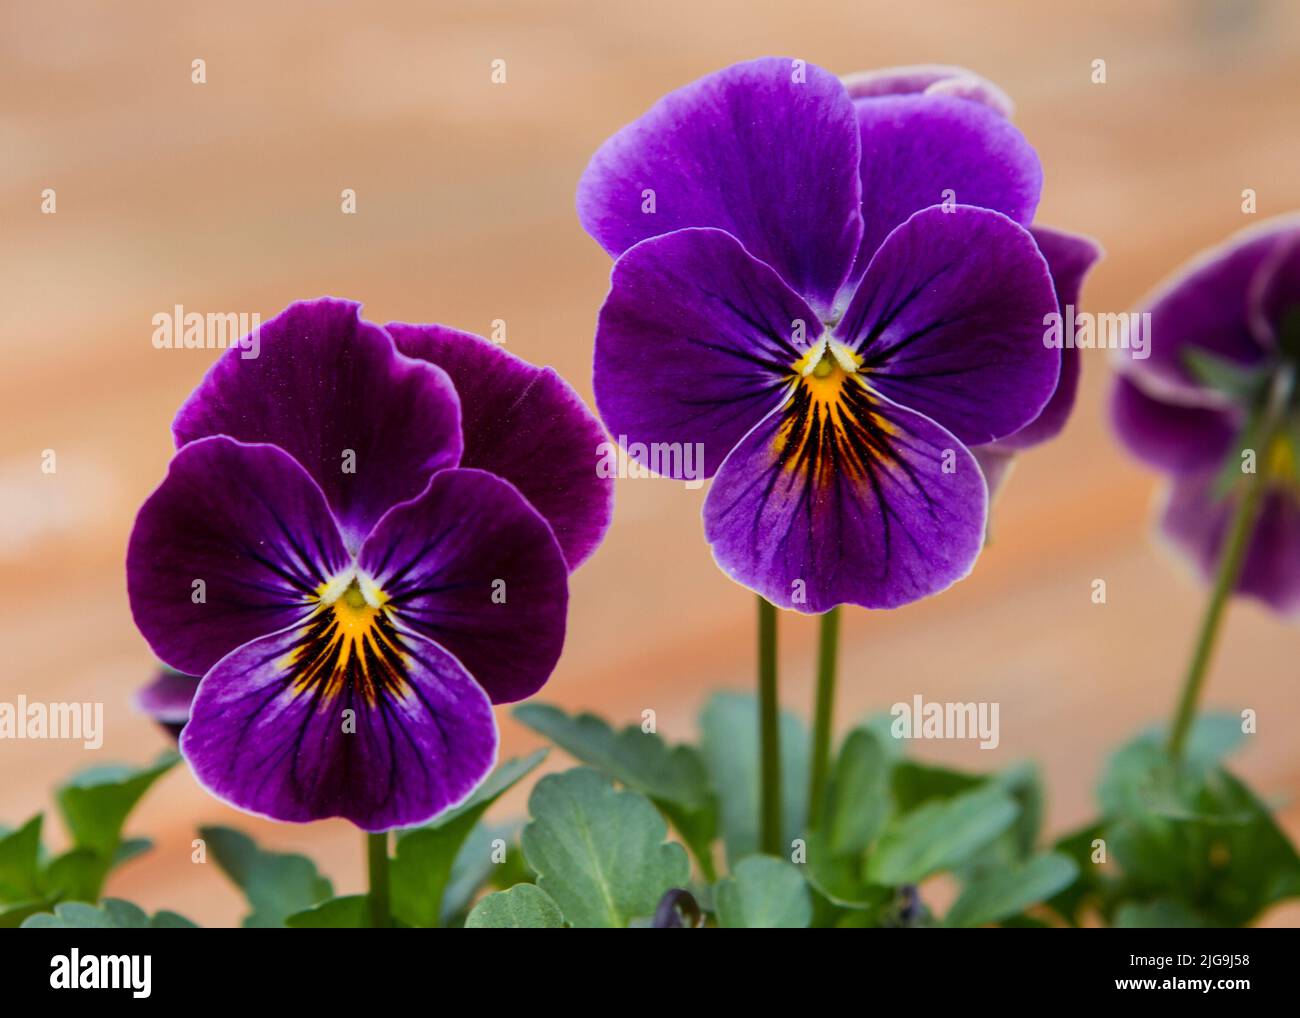 Closeup of two Sorbet Antique Shades Viola flowers in landscape format. Stock Photo